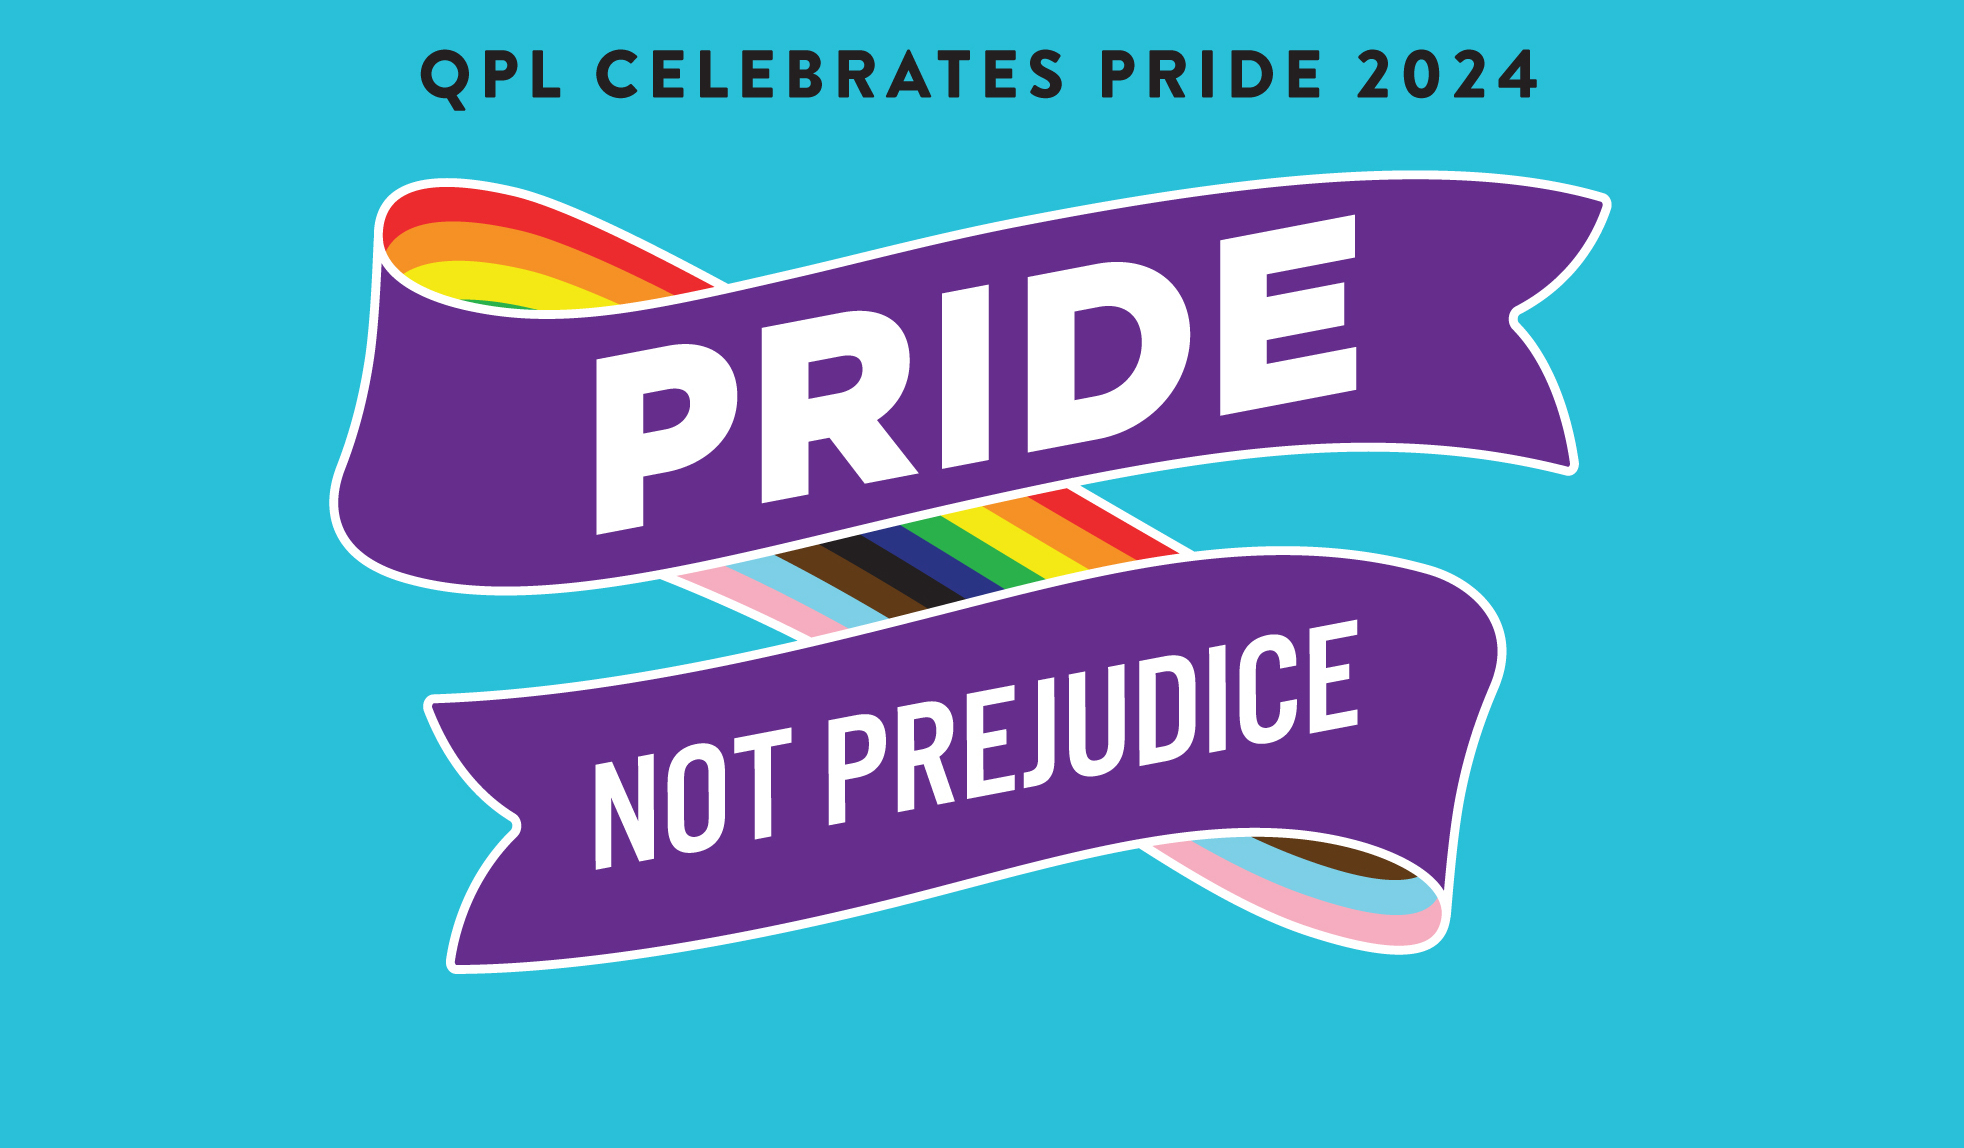 We're embracing the theme "Pride, Not Prejudice" as we celebrate the vibrant spectrum of the LGBTQ+ community.